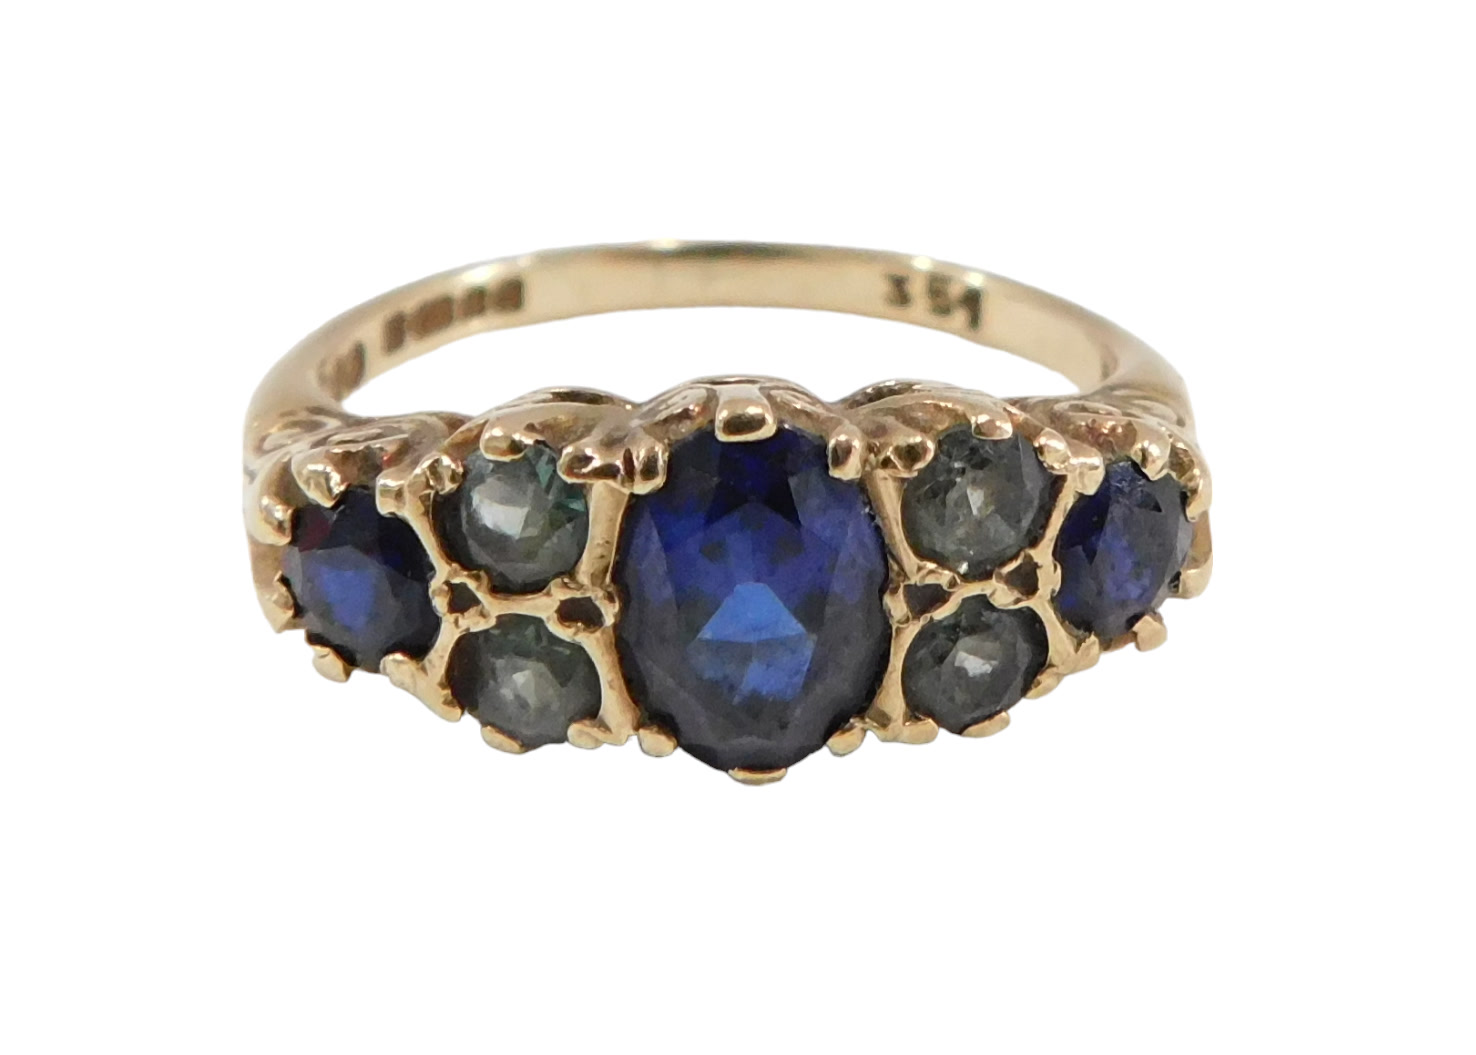 A sapphire and peridot gypsy ring, set with central oval sapphire flanked by two round brilliant cut